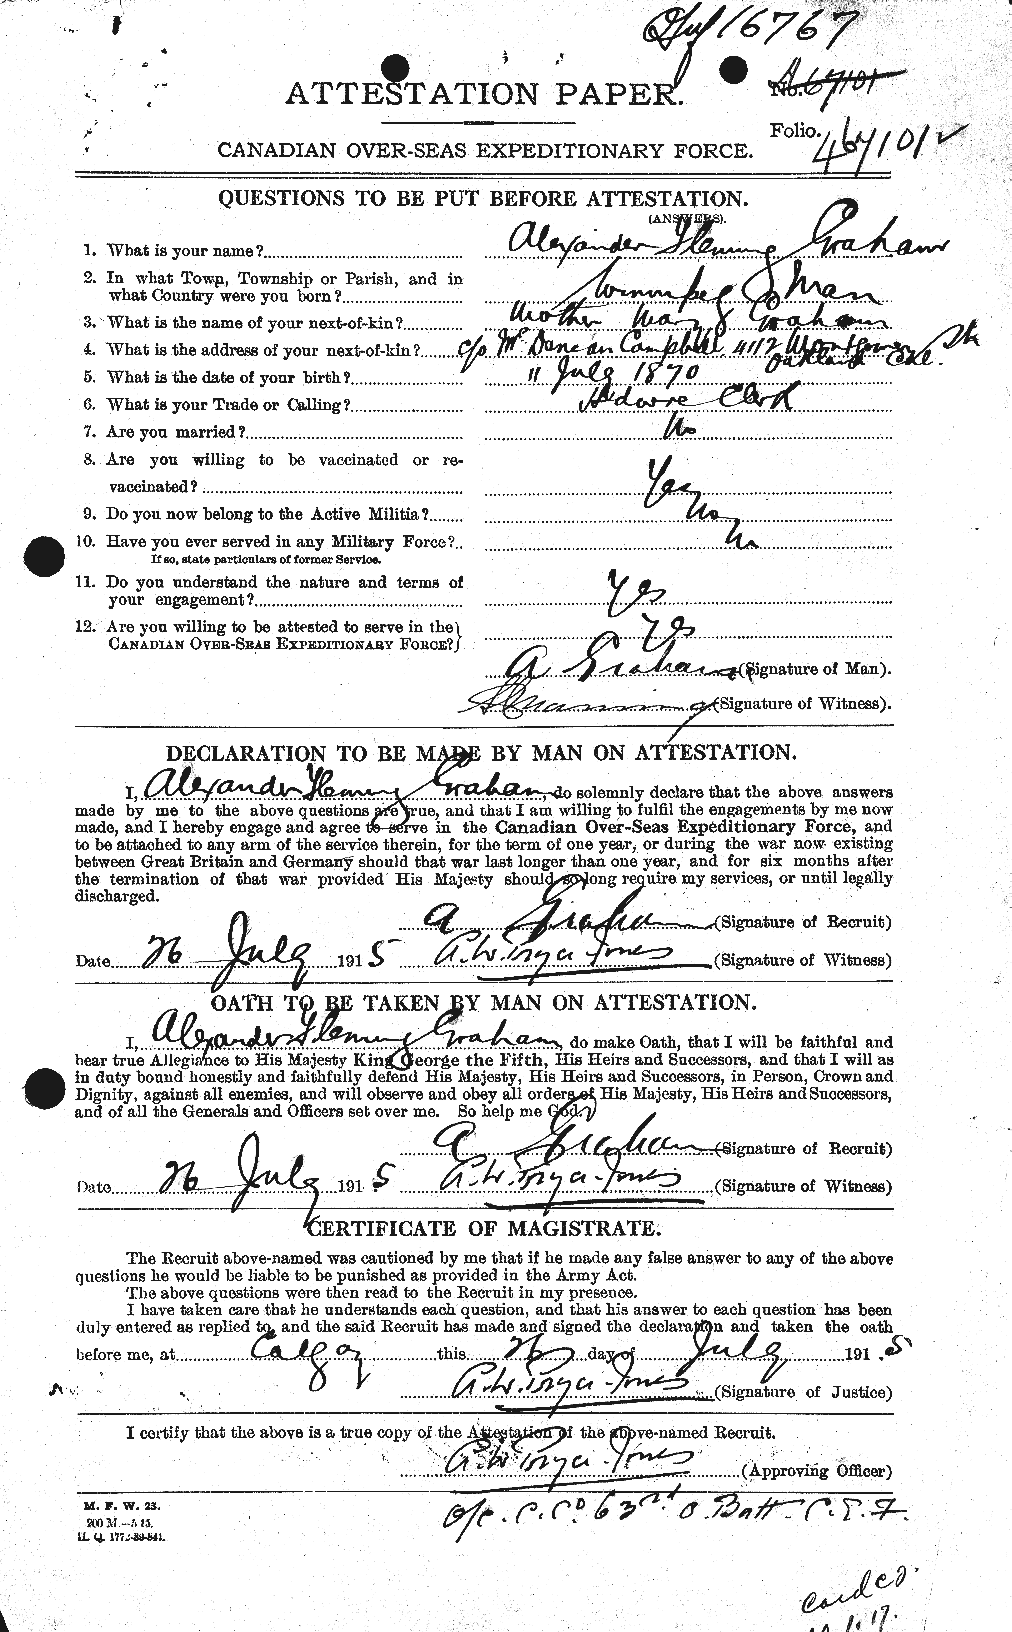 Personnel Records of the First World War - CEF 359590a